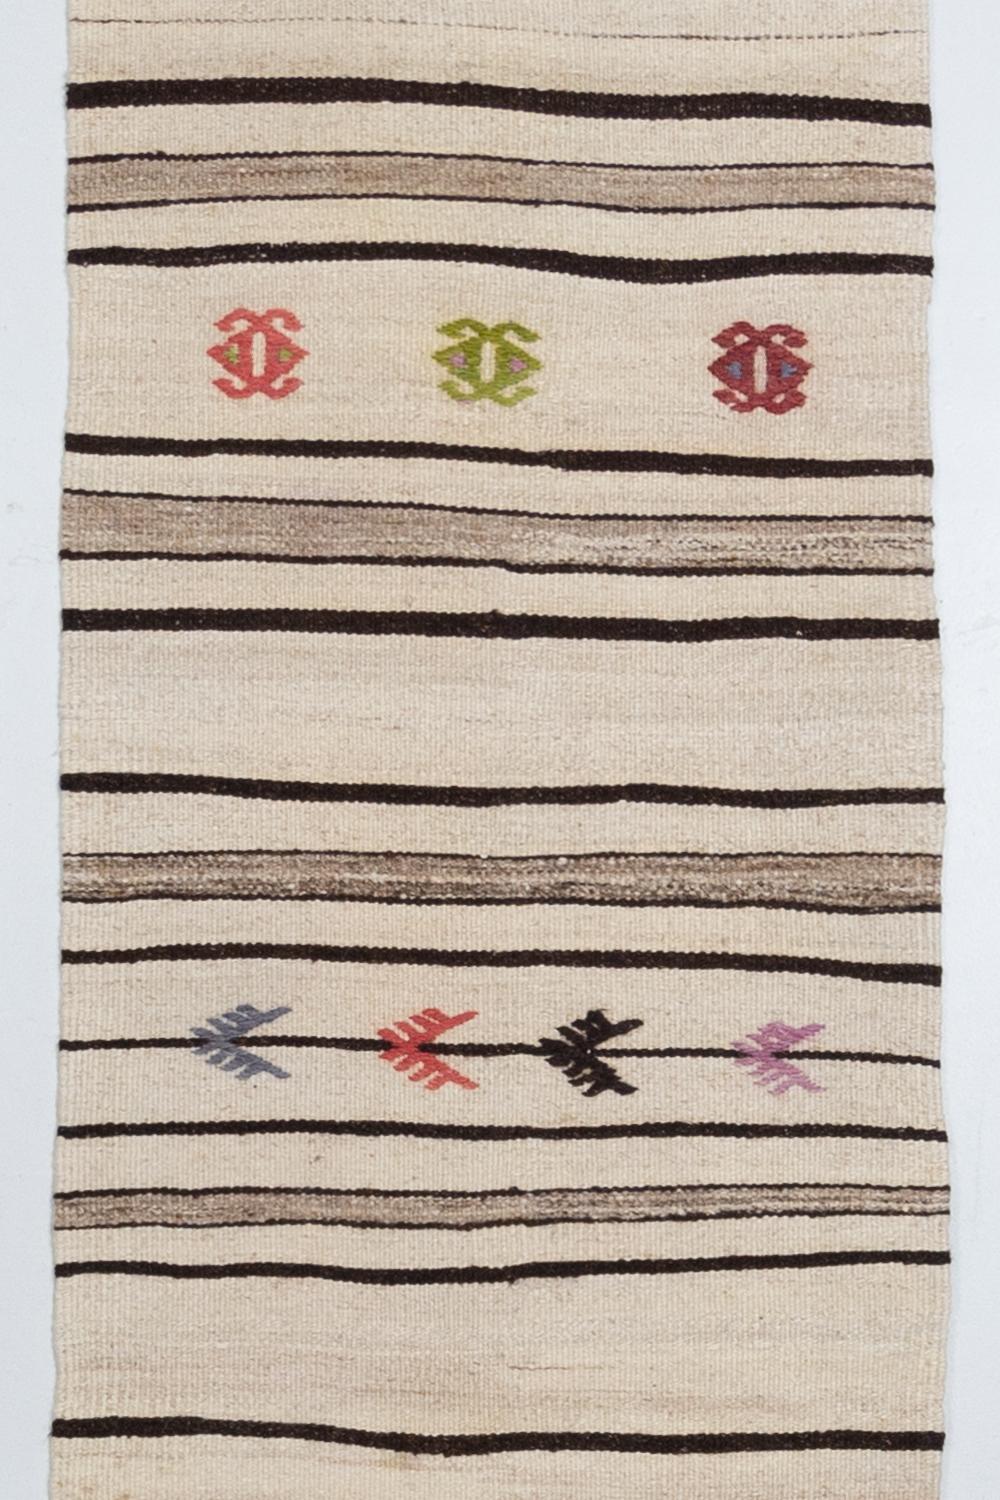 Age: mid-century

Pile: flatweave

Wear Notes: 0

Material: hemp and wool

Vintage rugs are made by hand over the course of months, sometimes years. Their imperfections and wear are evidence of the hard working human hands that made them and